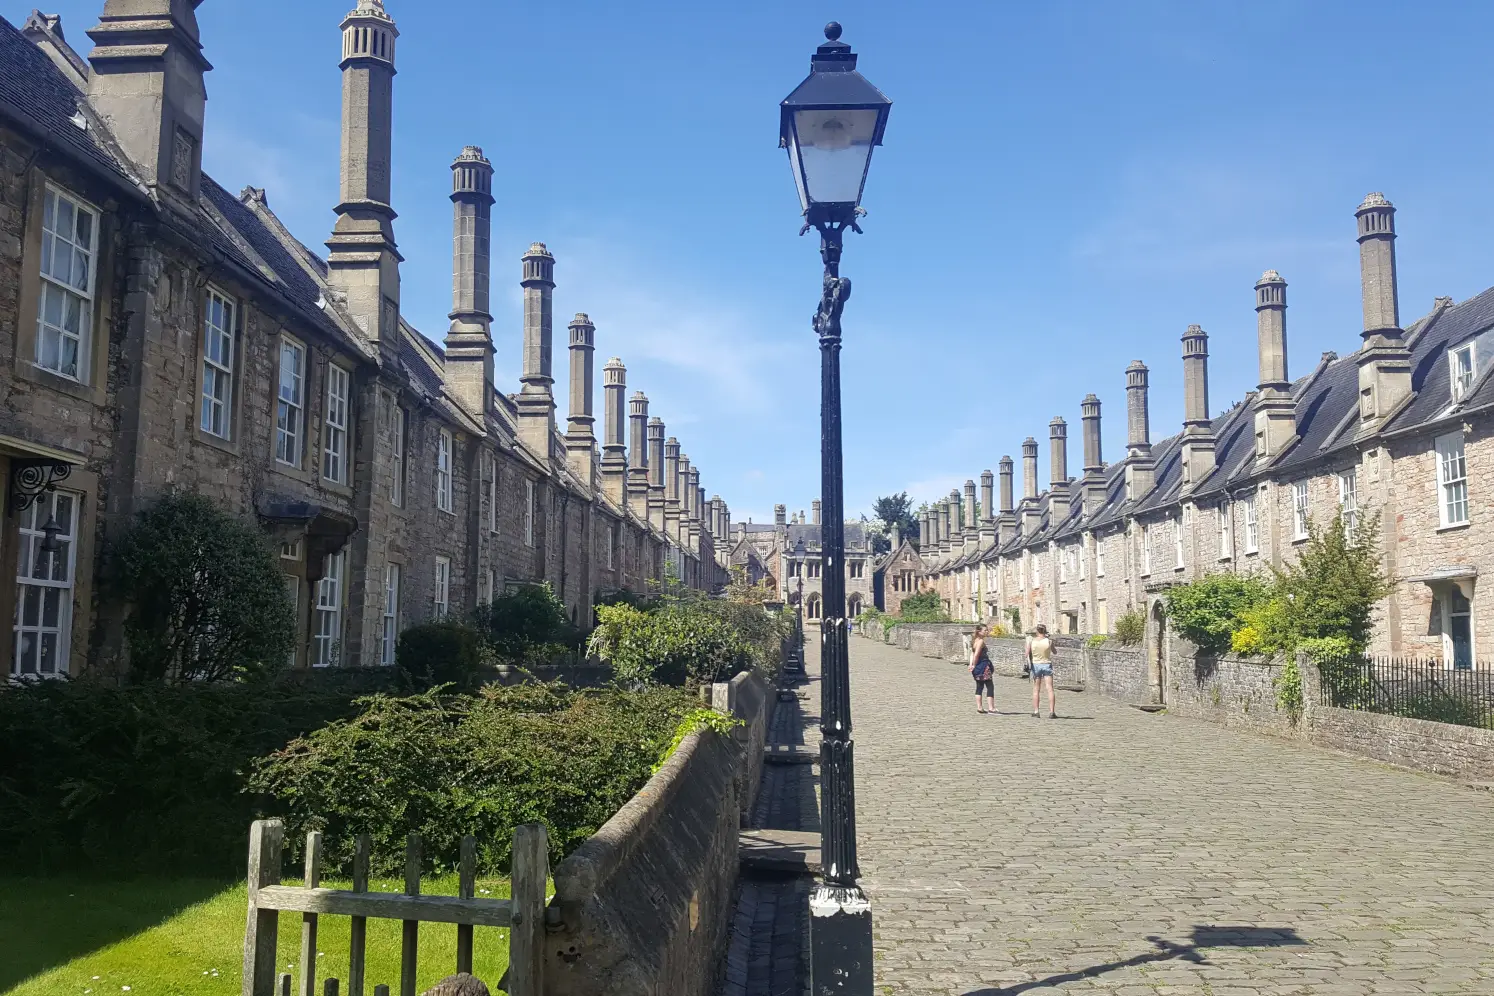 Medieval lane and quaint cottages of Vicar's Close in Wells